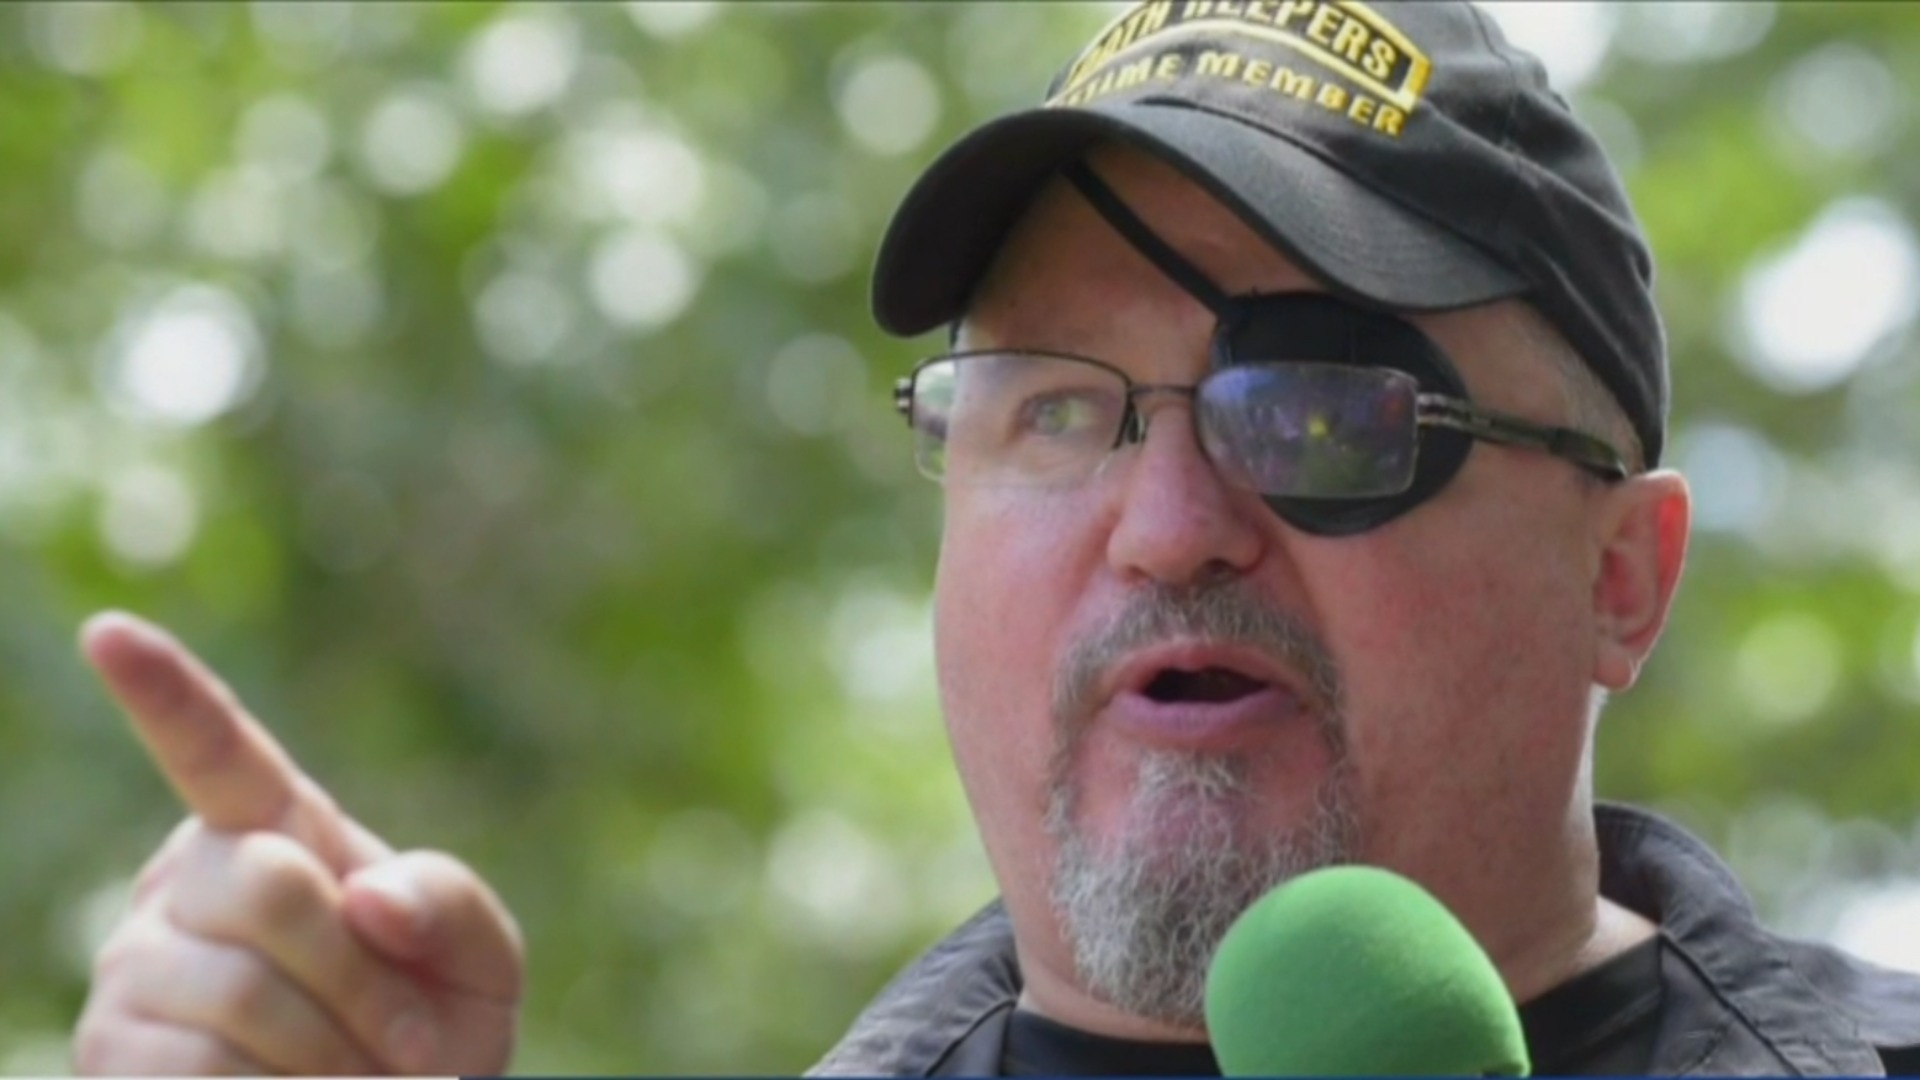 POLITICS  Oath Keepers leader Stewart Rhodes agrees to waive appearance in trial after positive COVID-19 test (cbsnews.com)